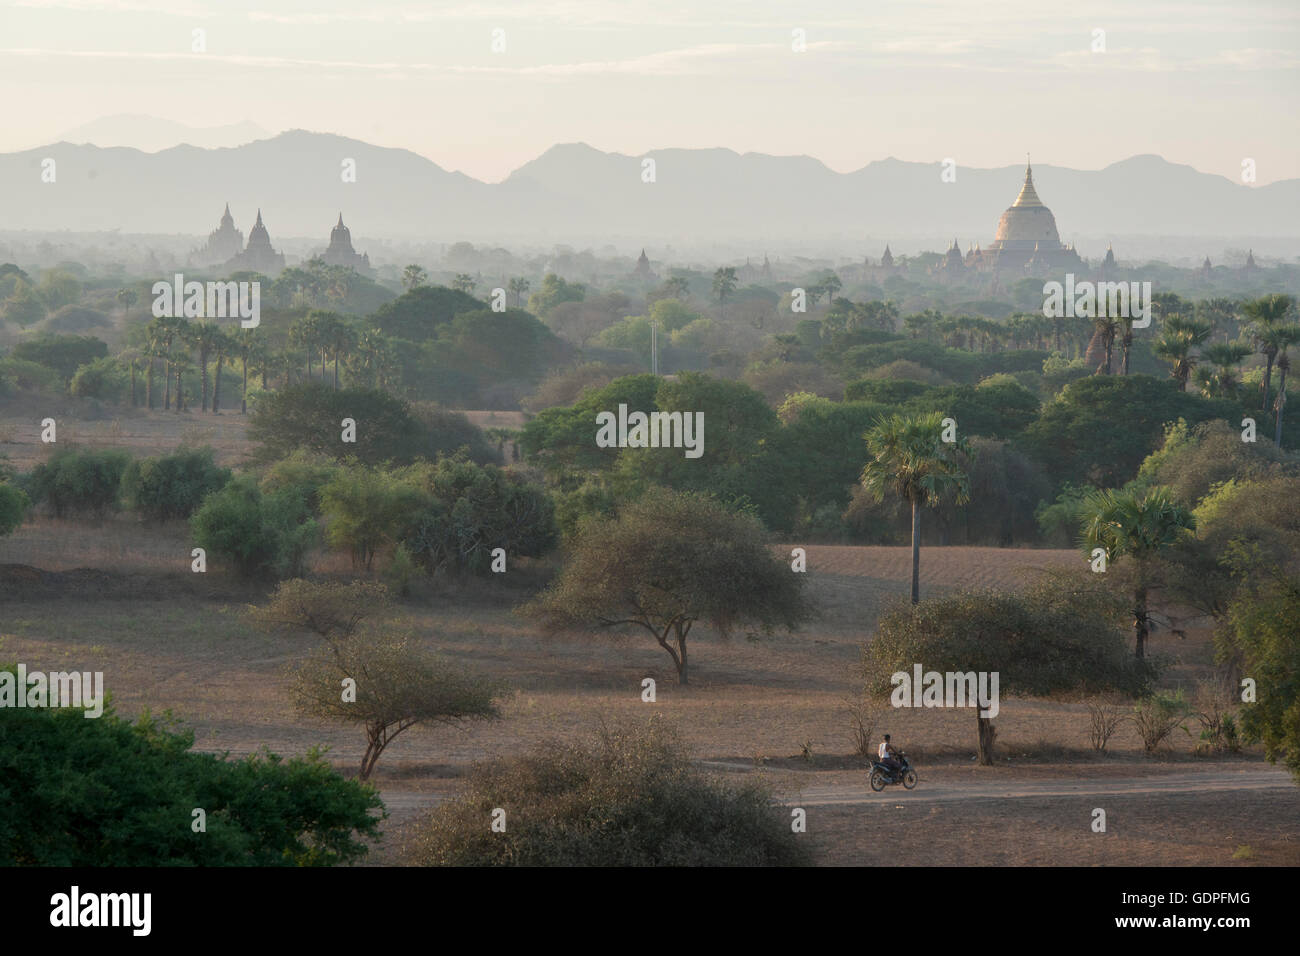 the Temple and Pagoda Fields in Bagan in Myanmar in Southeastasia. Stock Photo